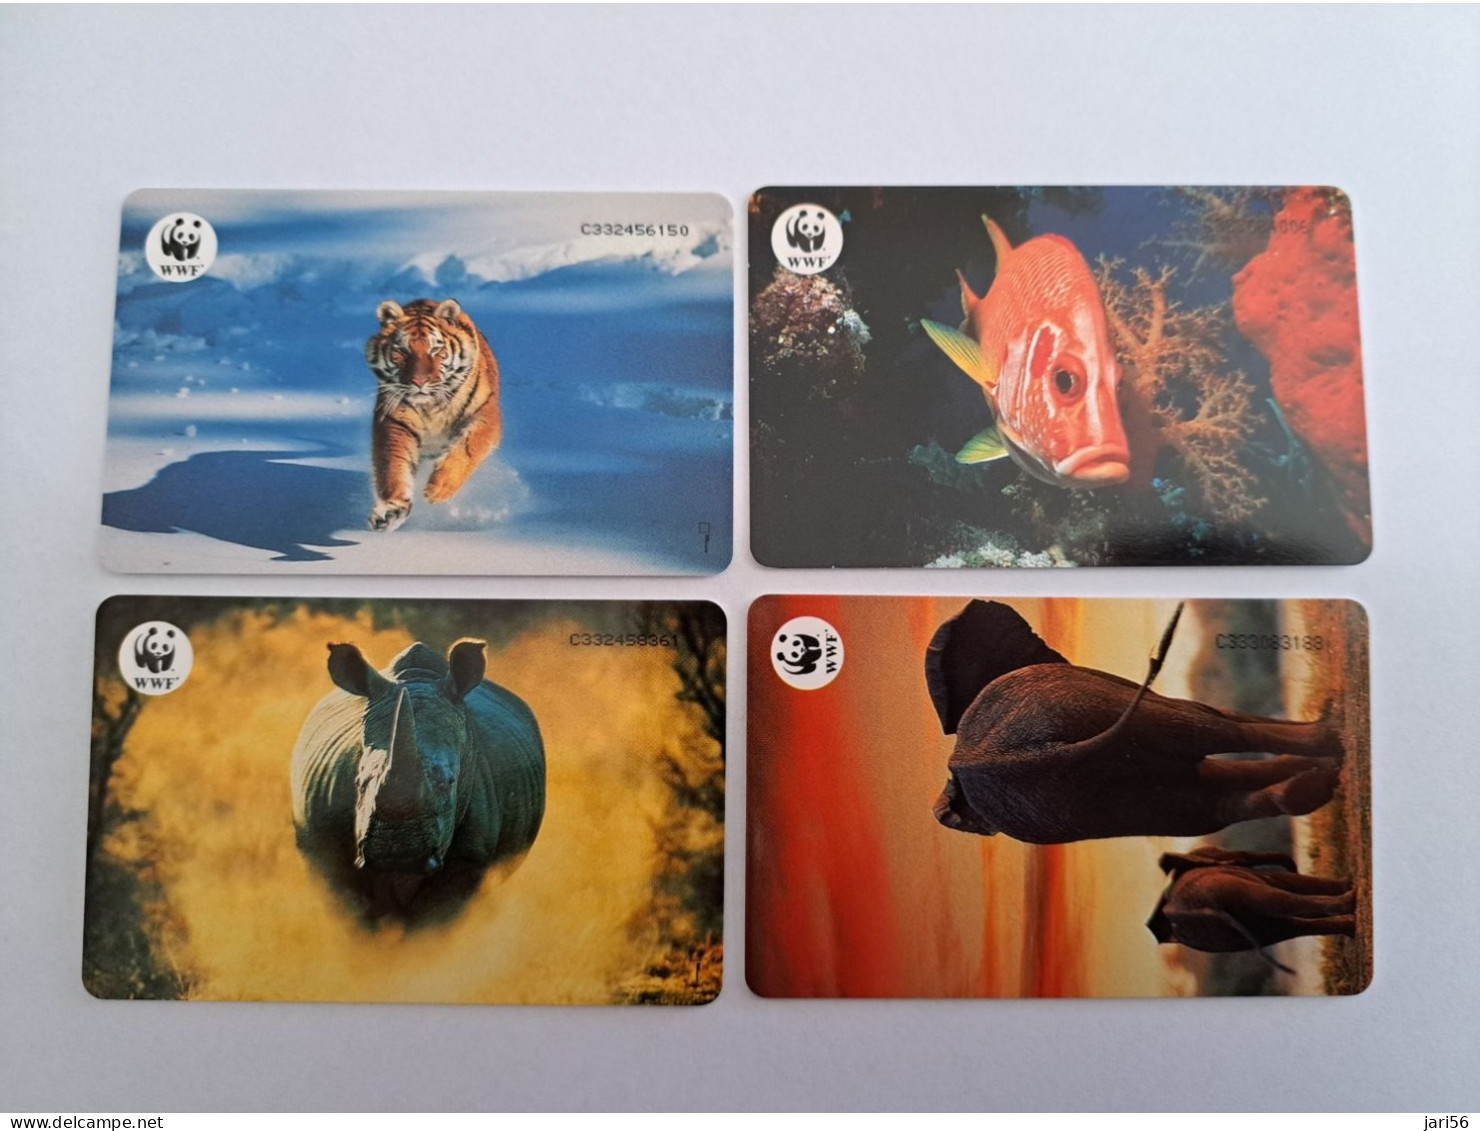 NETHERLANDS / WWF/WNF 4X CHIP ADVERTISING /DIFFICULT SERIE /  HFL 2,50 / CRD 531/01 T/M CRD 531.04  MINT !!  ** 13052** - Privé